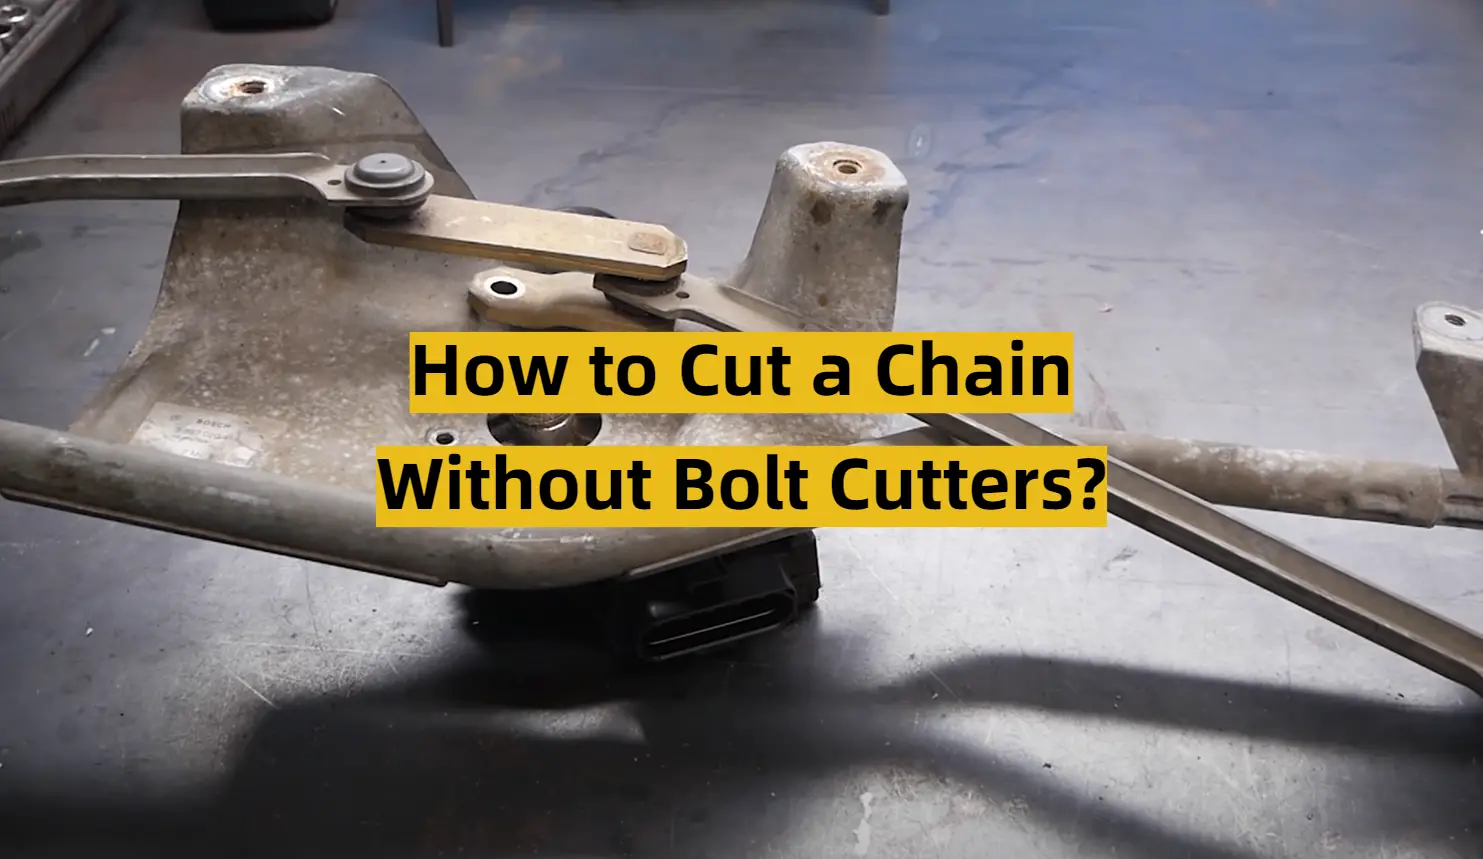 How to Cut a Chain Without Bolt Cutters?